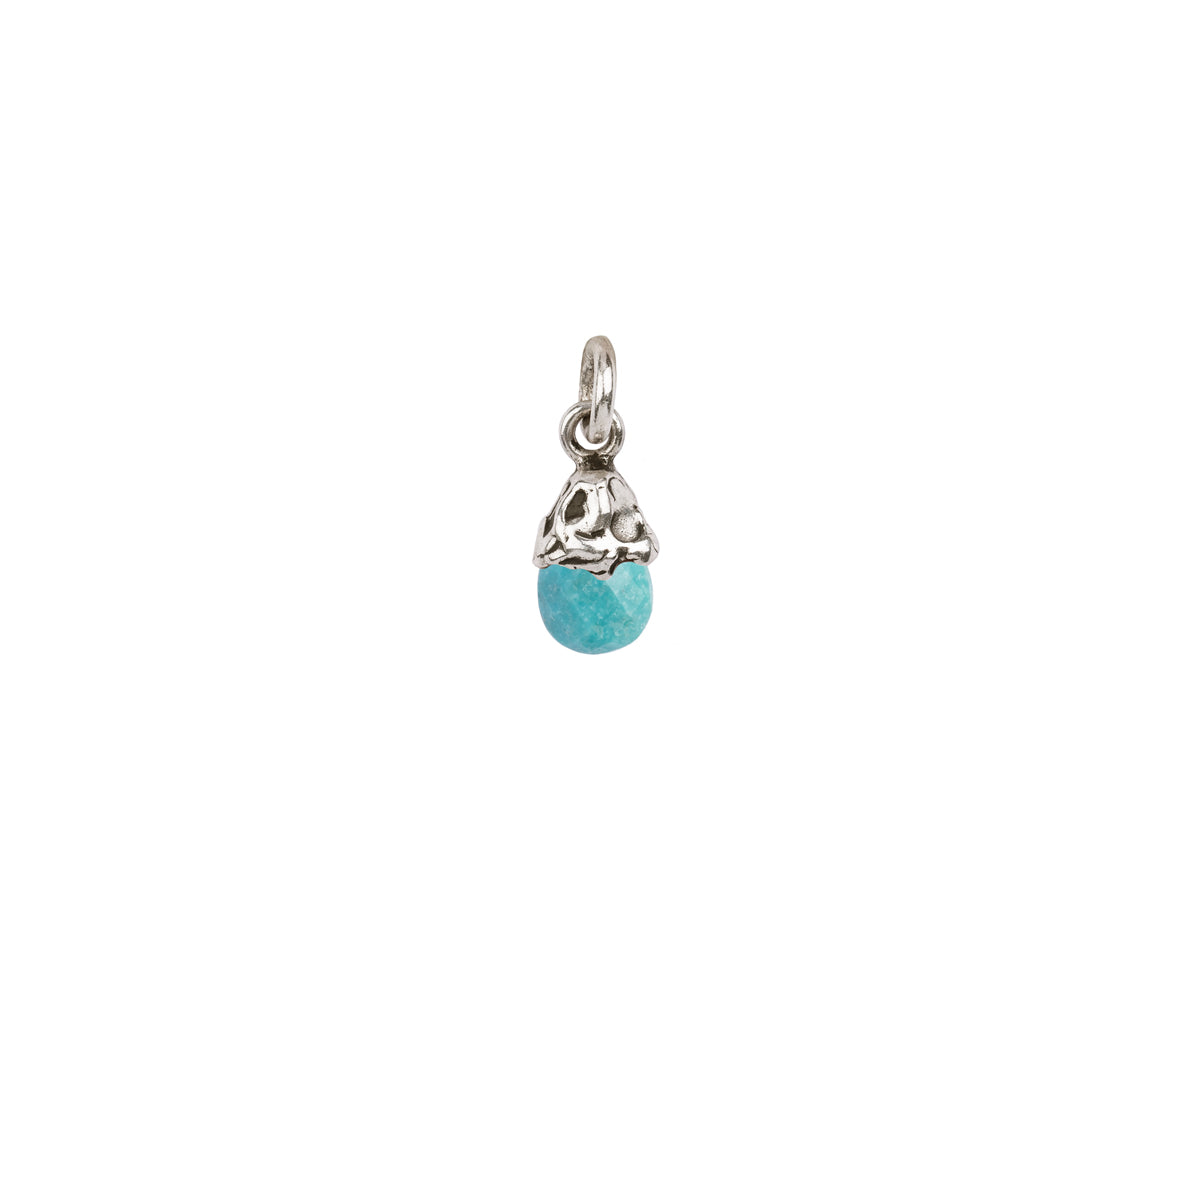 A silver attraction charm representing friendship.